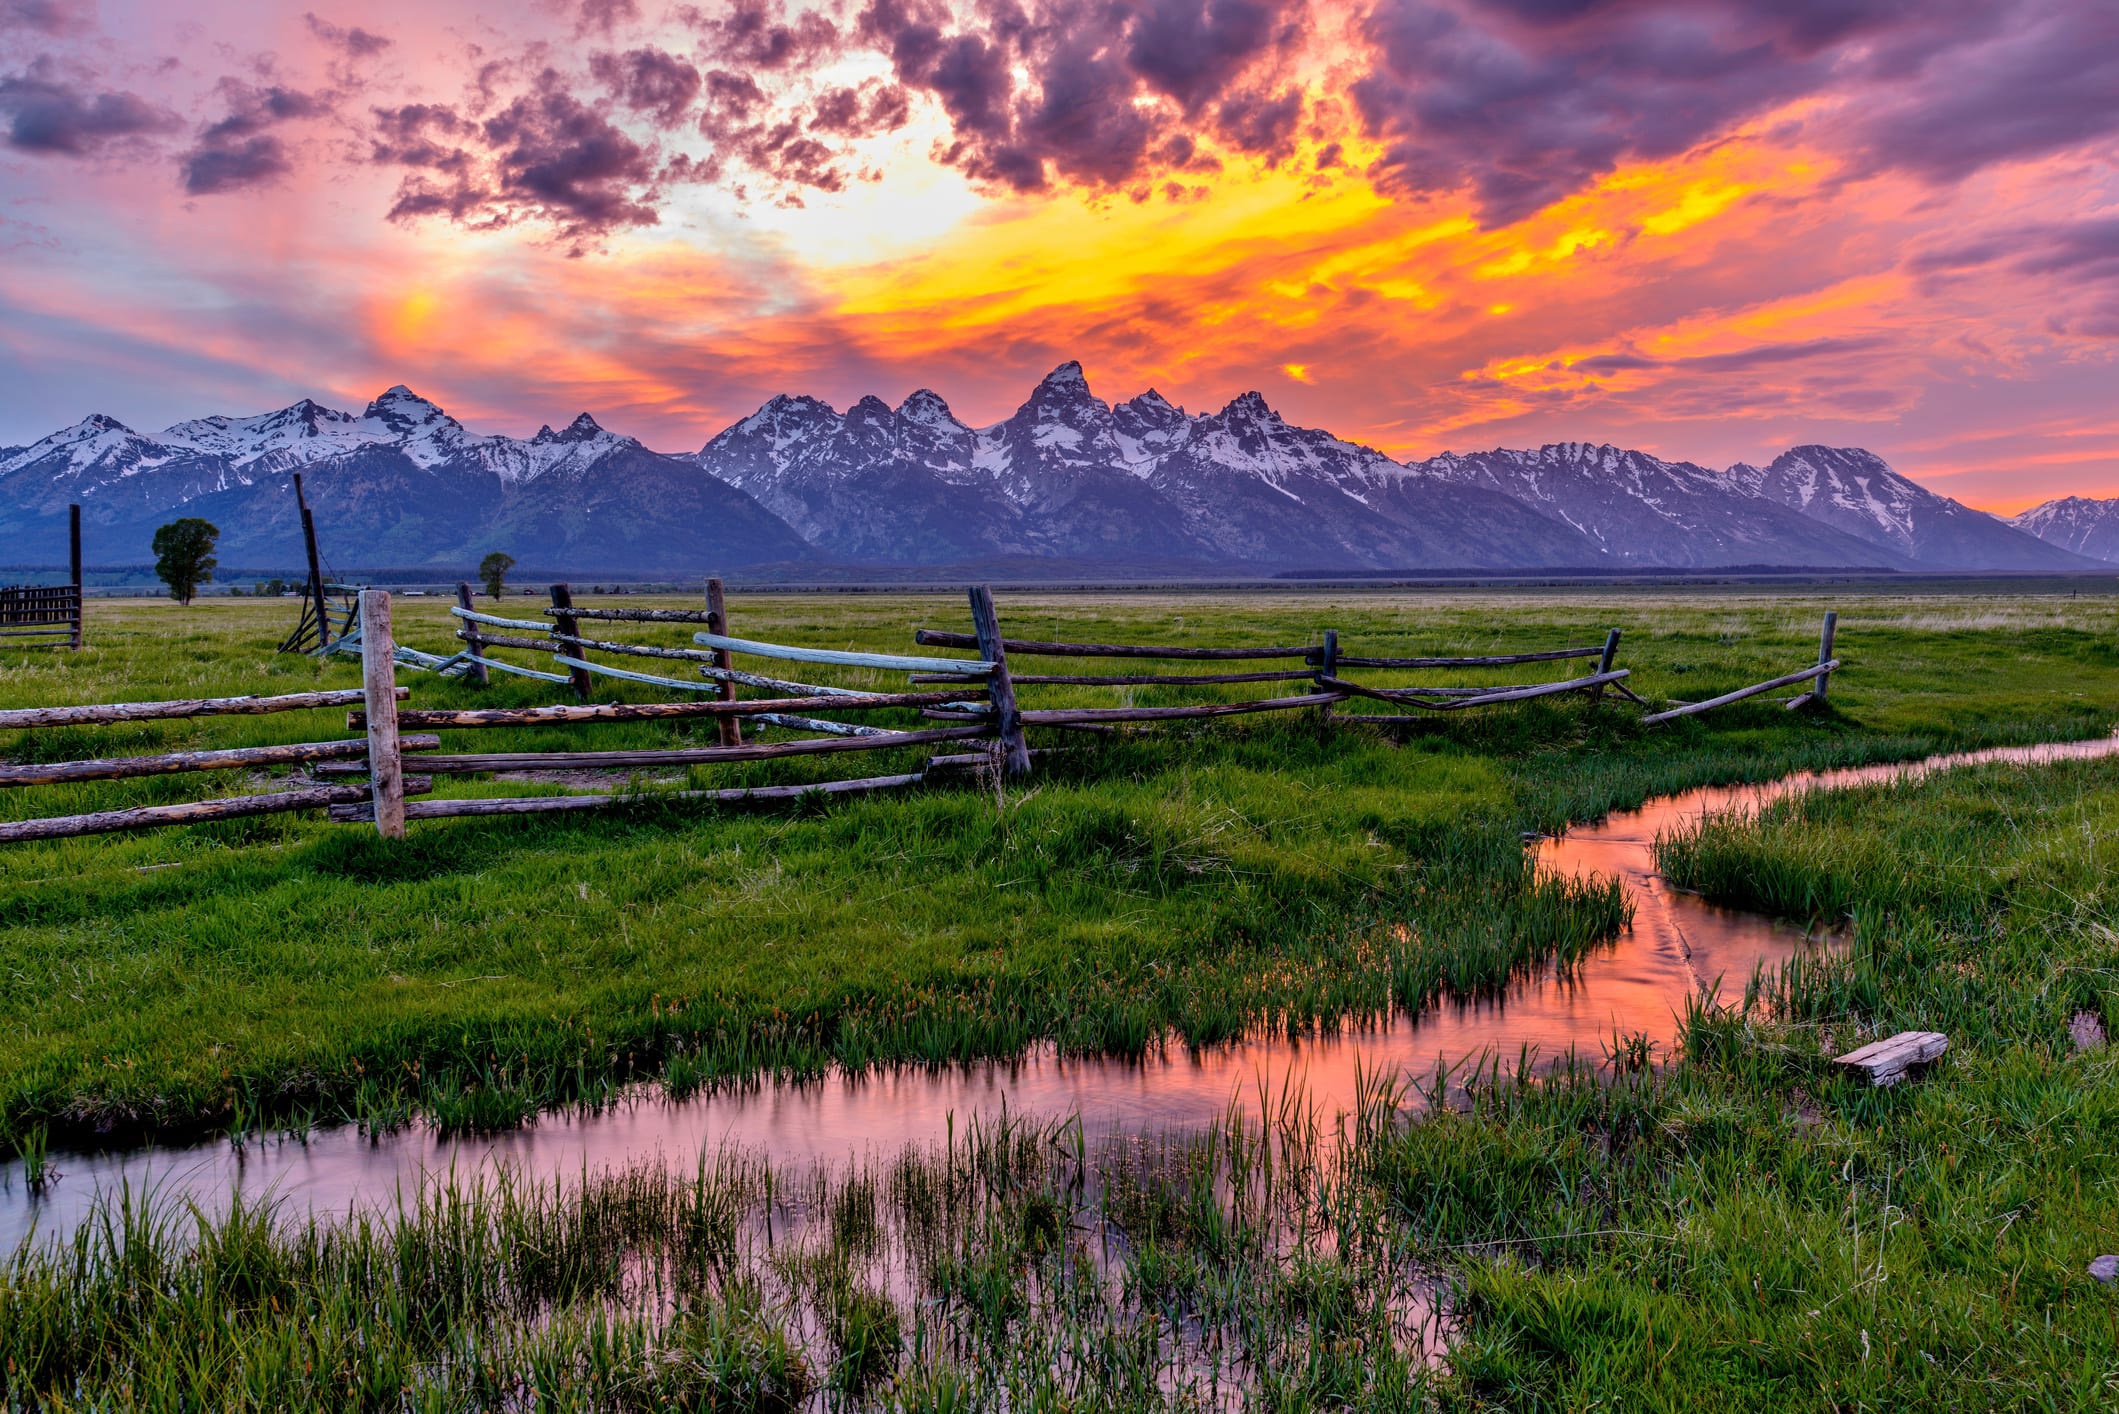 jackson hole guide: A colorful spring sunset at Teton Range, seen from an abandoned old ranch in Mormon Row historic district, in Grand Teton National Park, Wyoming, USA.